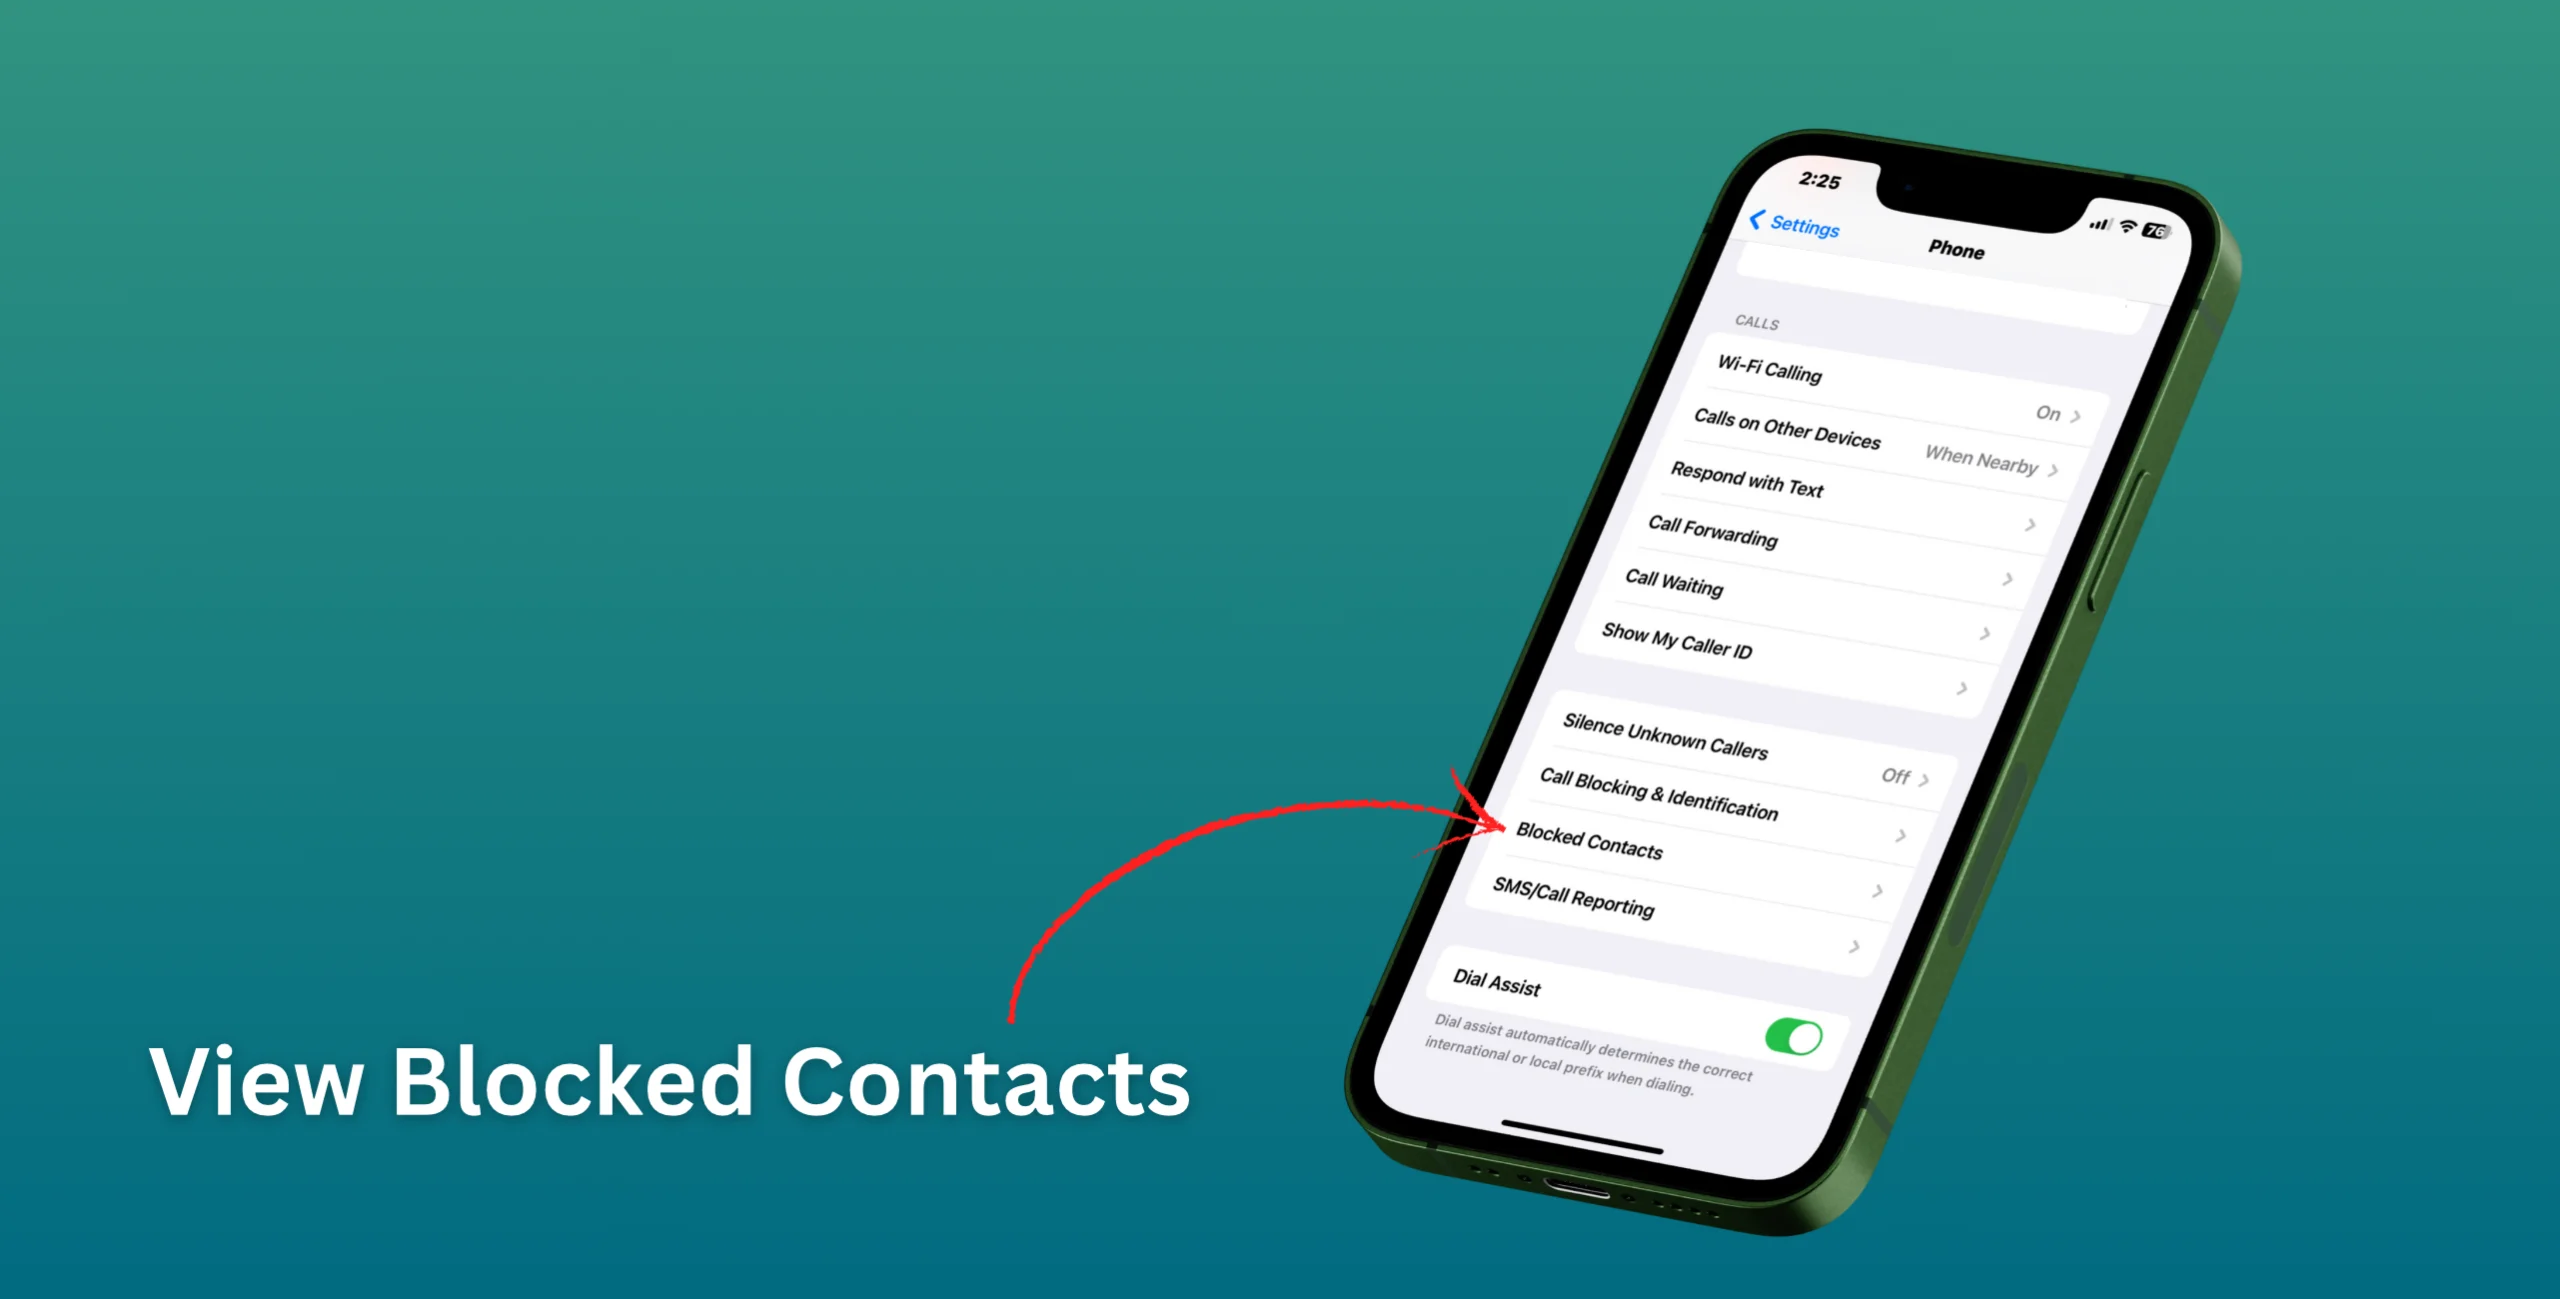 View Blocked Contacts